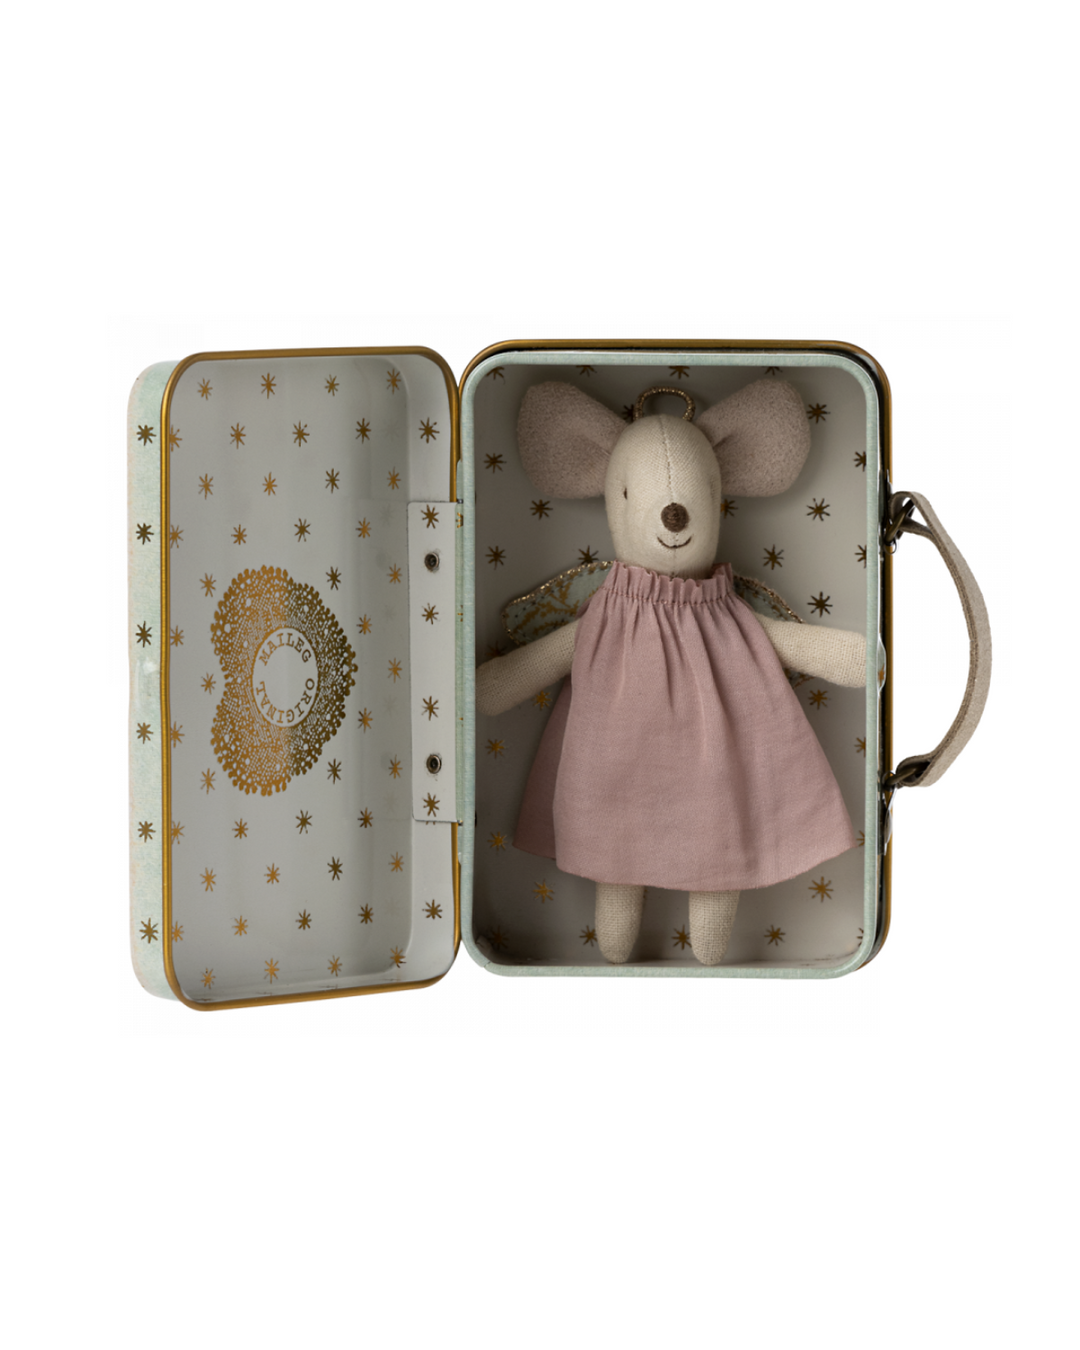 Angel Mouse in Suitcase - Heavenly Maileg Doll for Kids